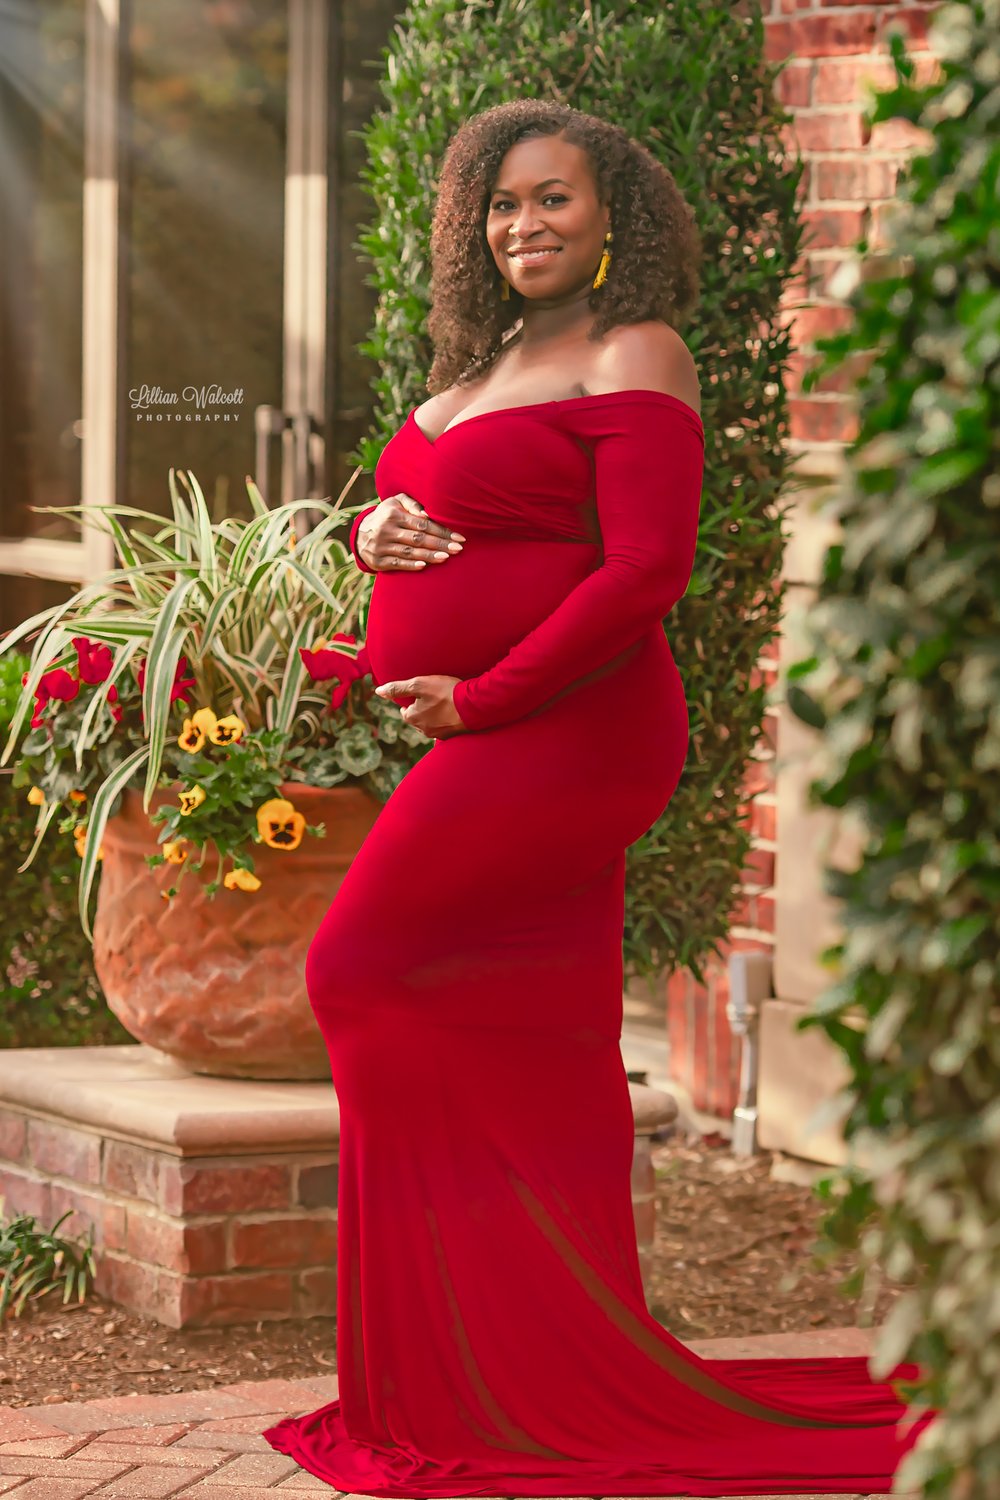 Outdoor Maternity Session (30 Minutes) | Lillian Walcott Photography